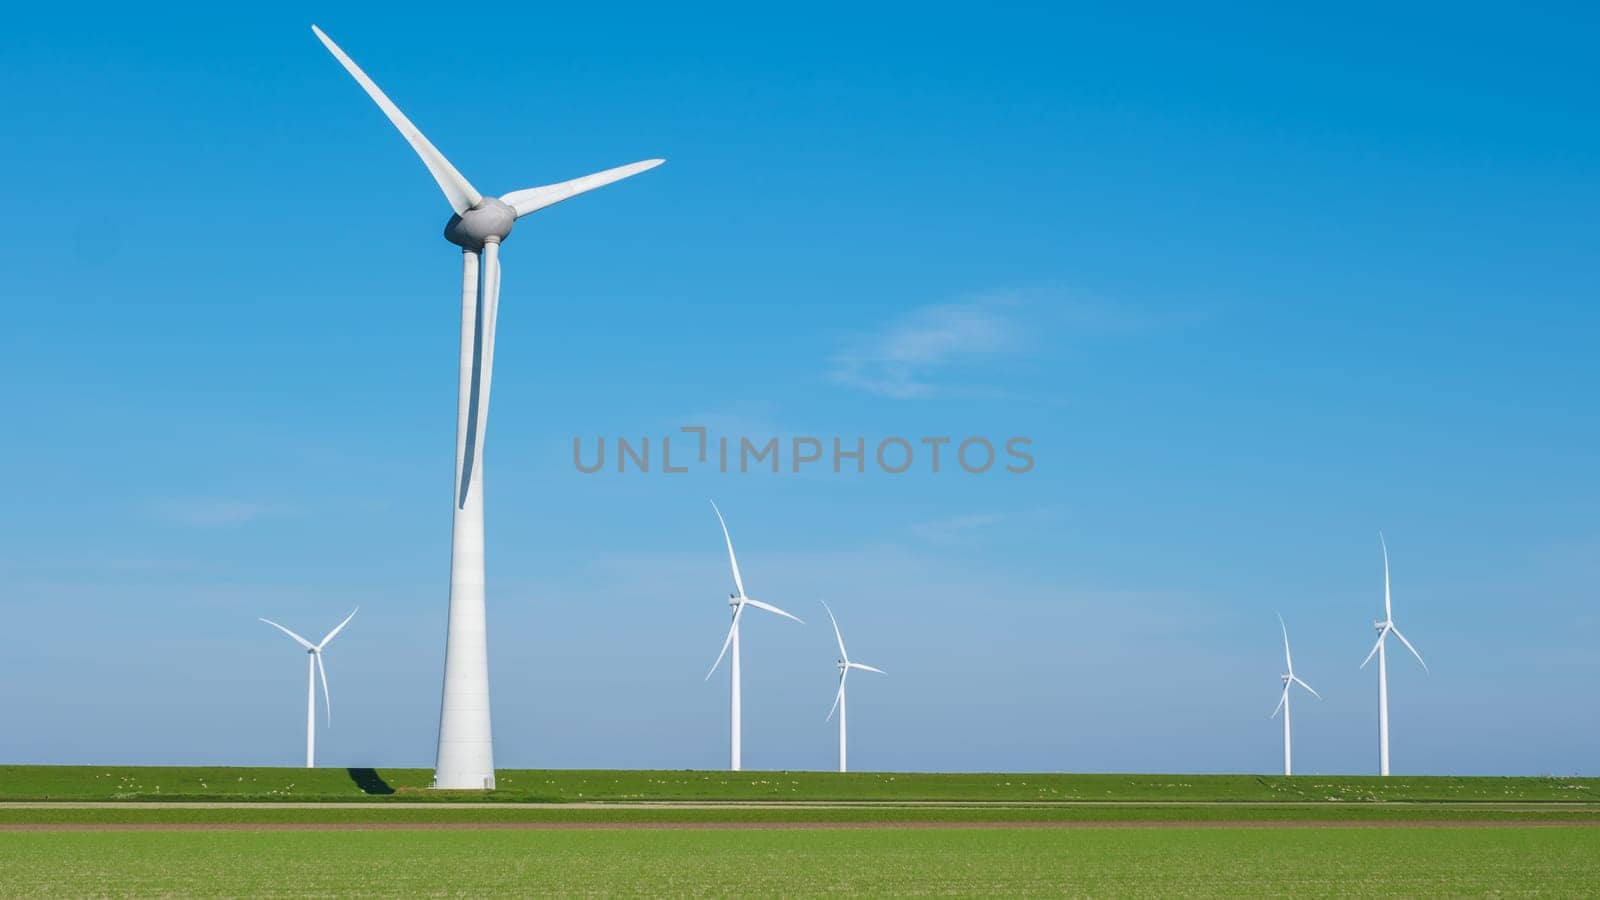 A group of wind turbines dance gracefully in a lush green field under the clear blue sky, harnessing the power of the wind to generate clean energy by fokkebok